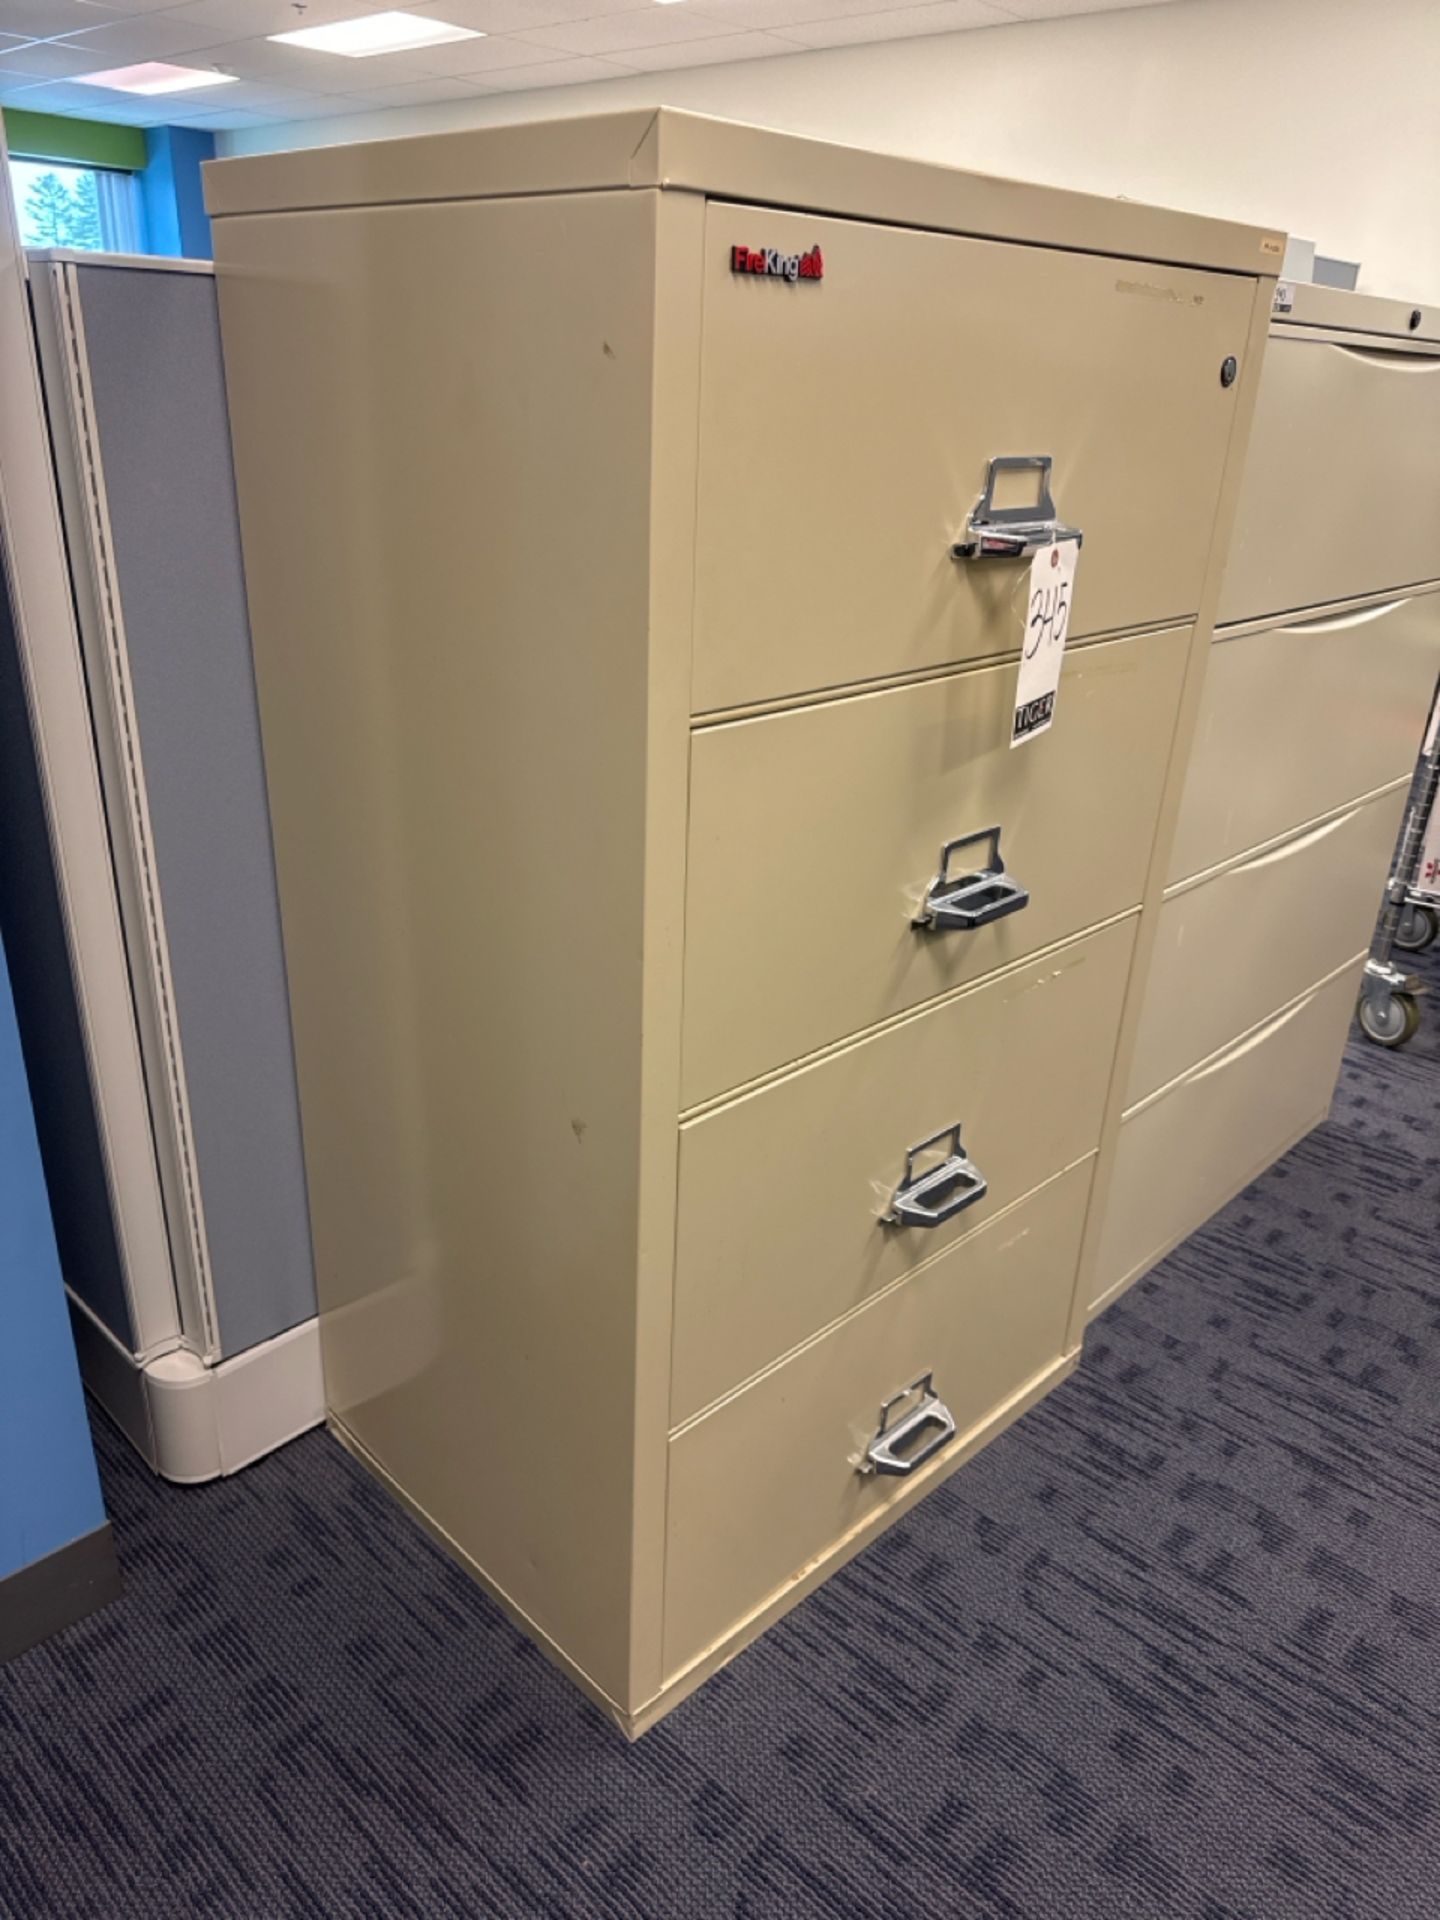 Fire King 4-Drawer Lateral File Cabinet - Image 2 of 4